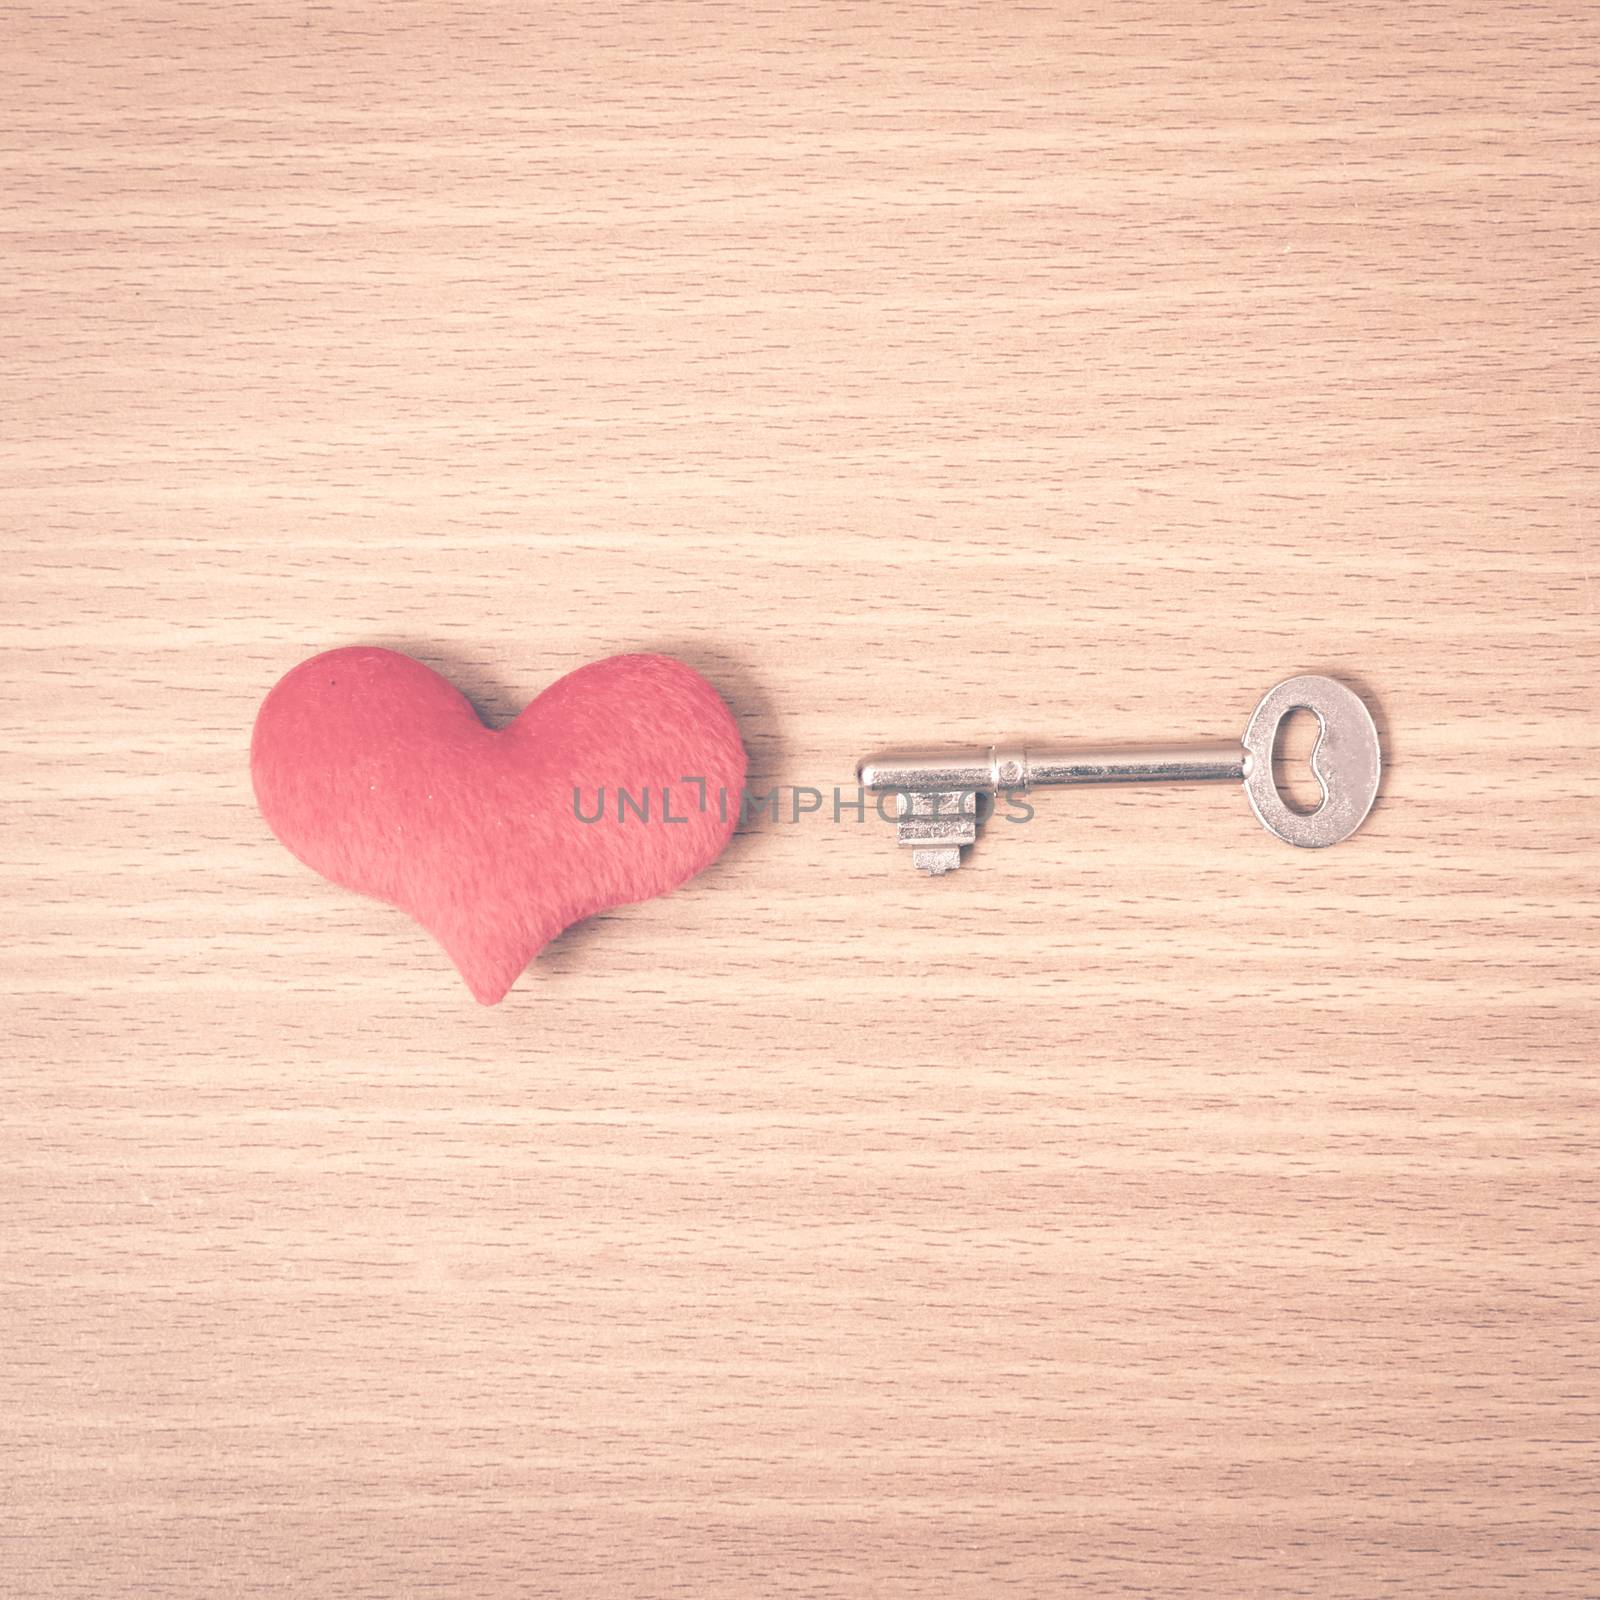 red heart with key on wood table background vintage style